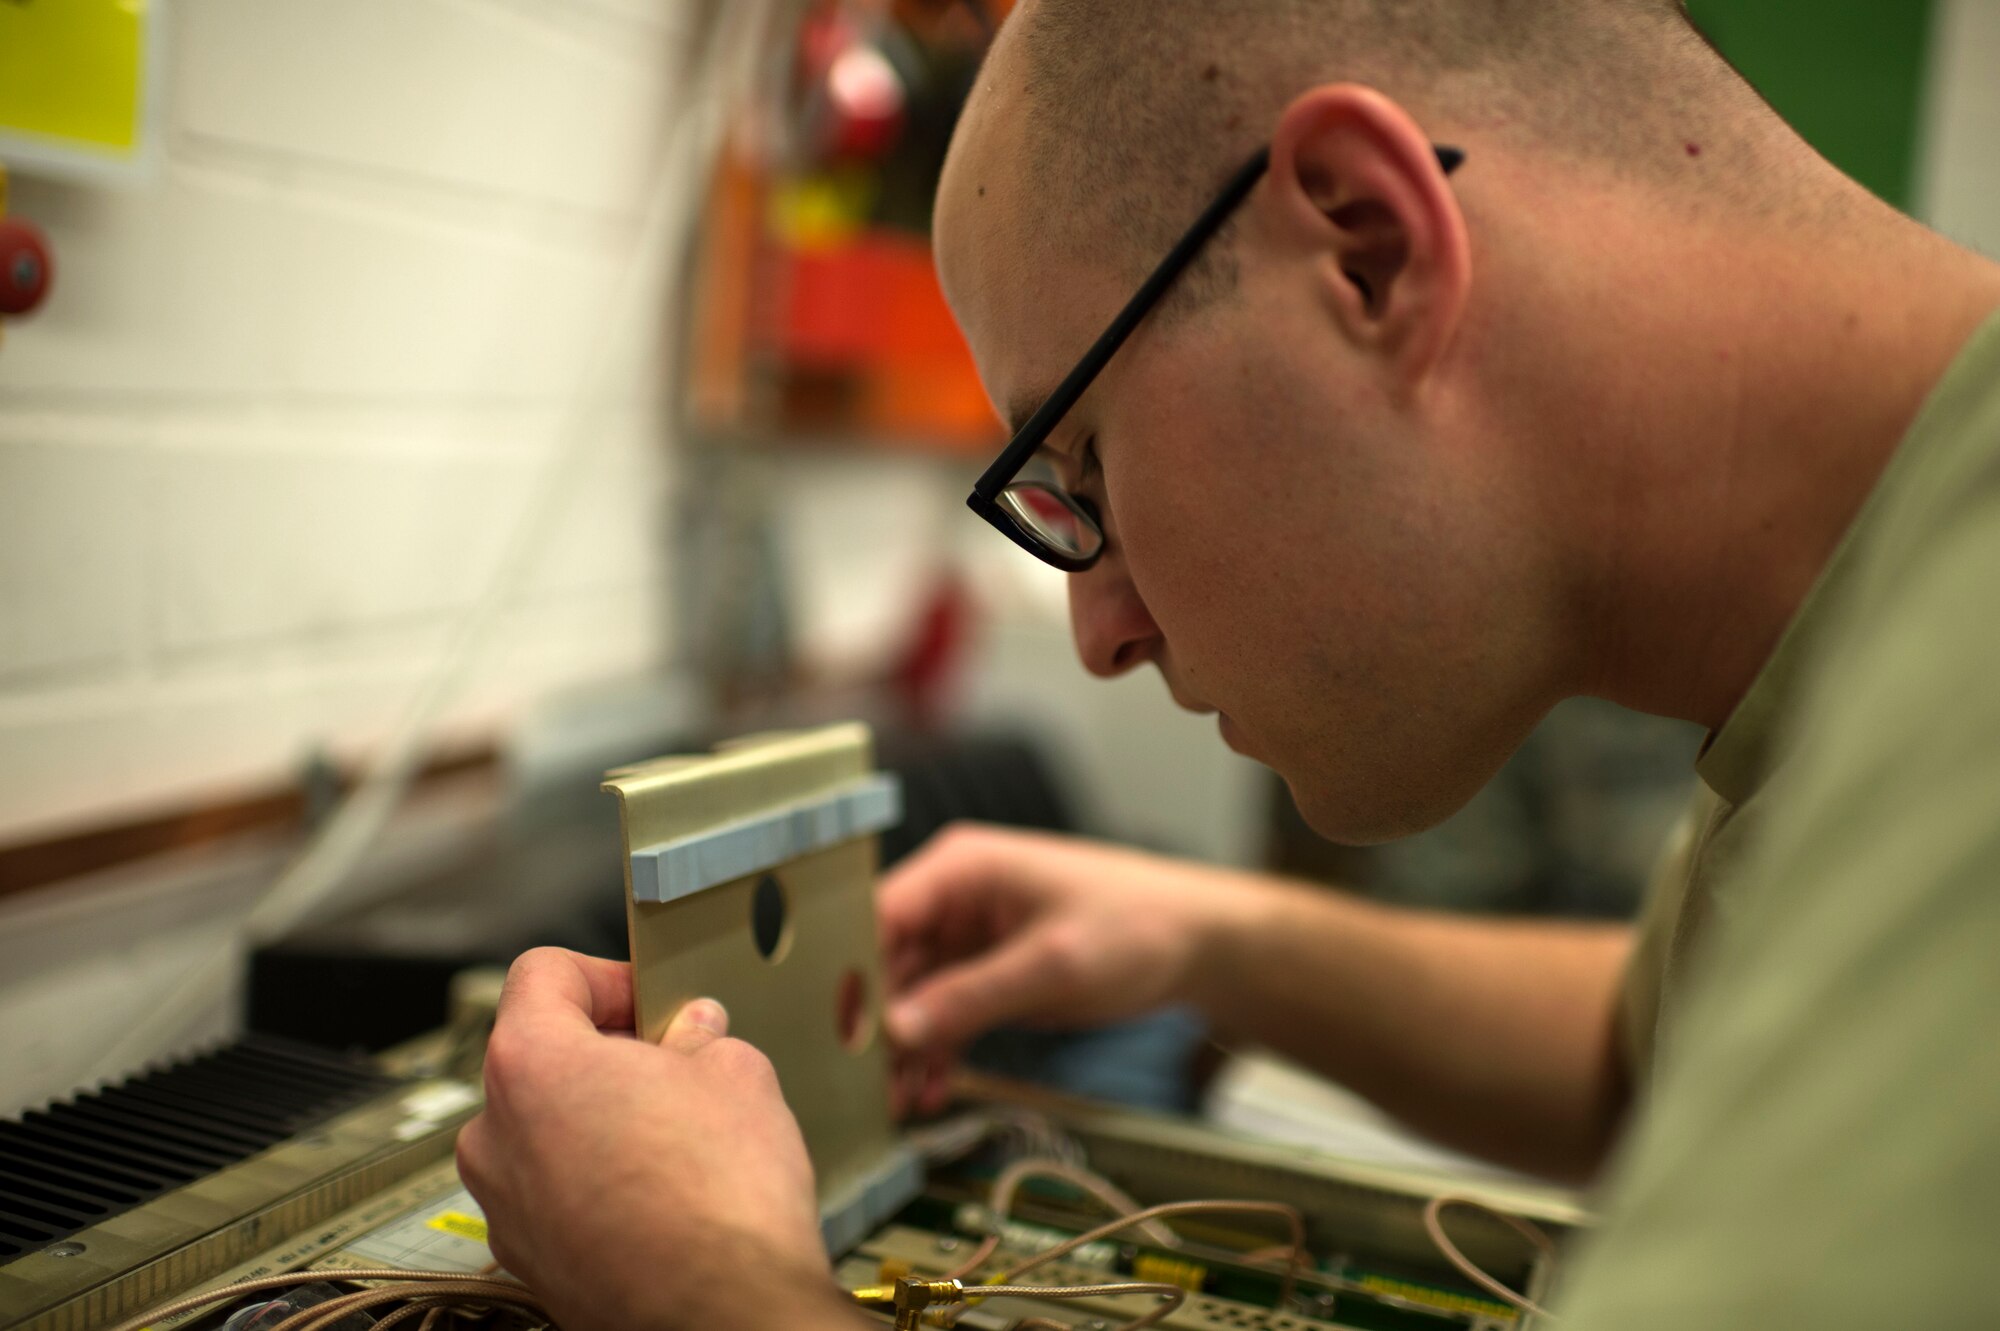 U.S. Air Force Senior Airman Alex Lollar, 606th Air Control Squadron radio frequency transmission technician from Pensacola, Fla., assembles a GRC-171 radio transceiver at Spangdahlem Air Base, Germany, June 30, 2014. In working condition, the transceiver, designed for reliable air traffic control communications, can transmit a signal to aircraft approximately 250 nautical miles away. (U.S. Air Force photo by Senior Airman Gustavo Castillo/Released)  